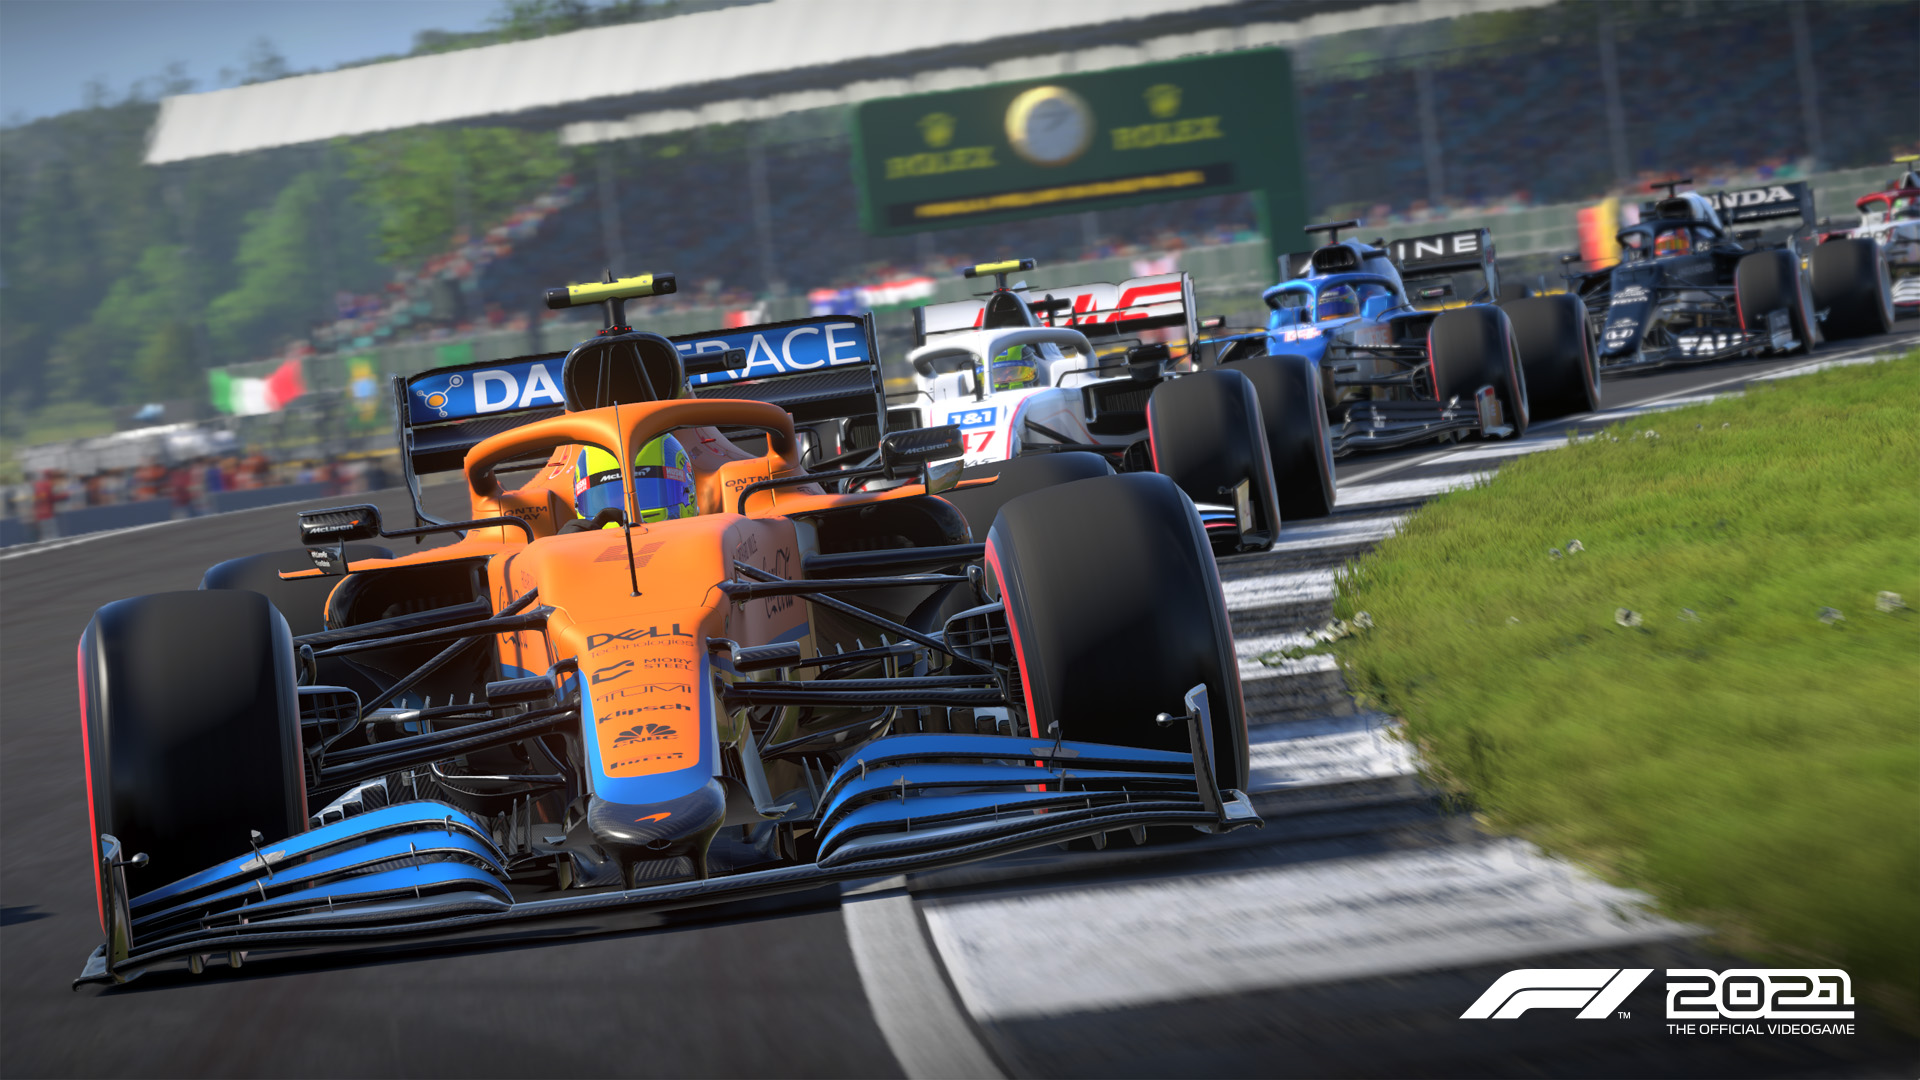 Schumacher Senna And Co Op Multiplayer Are New Additions For F1 21 Ars Technica